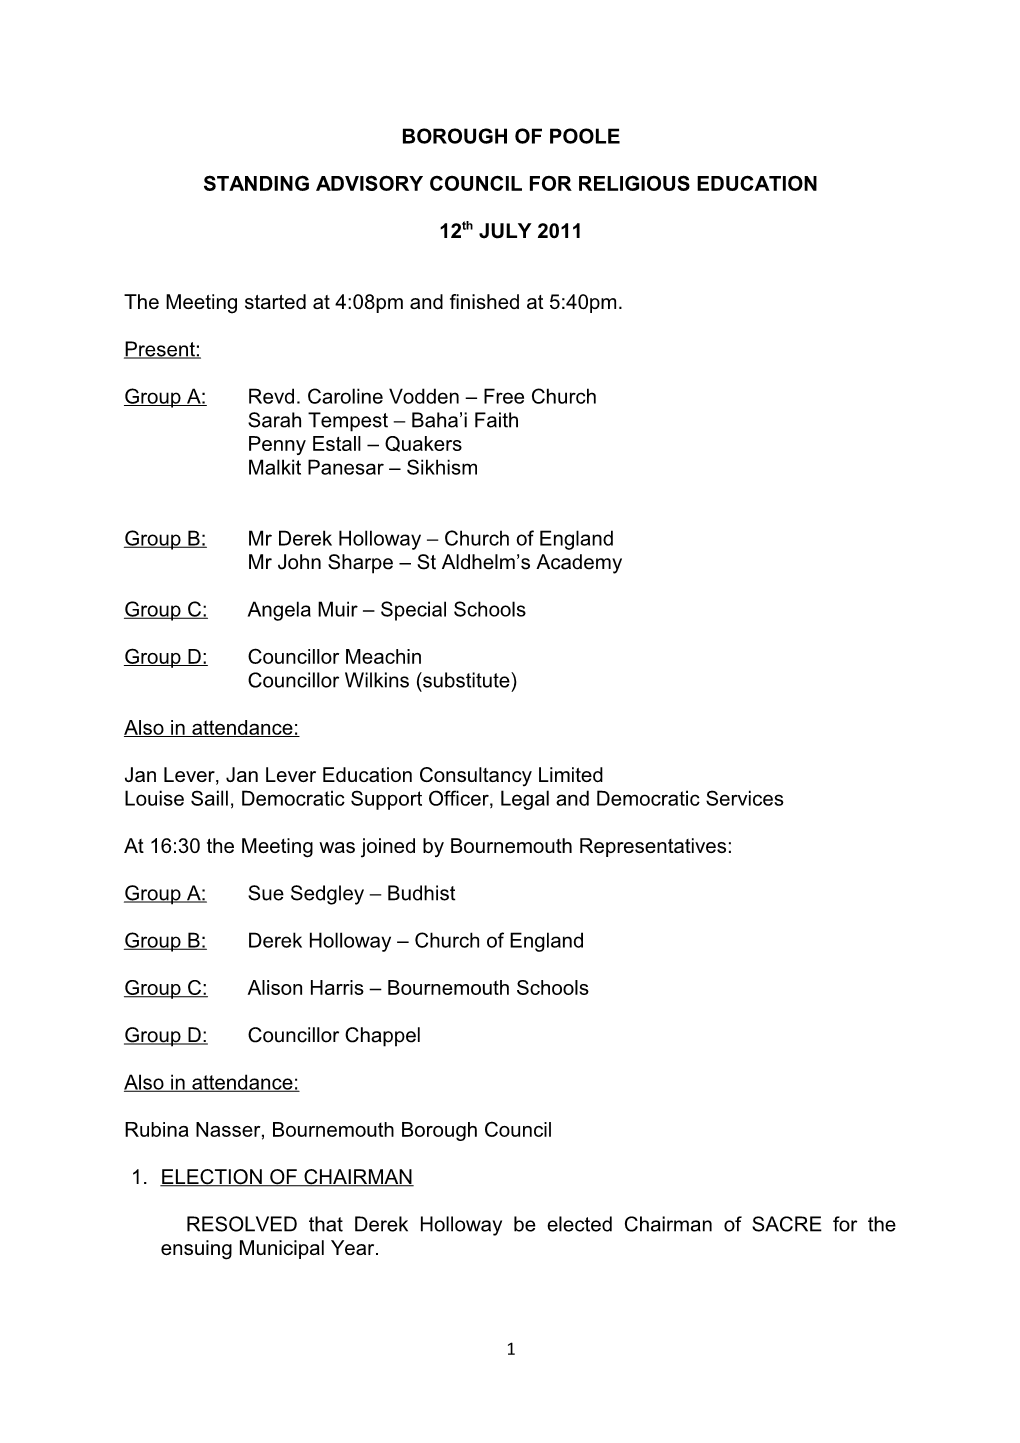 Minutes - Standing Advisory Council for Religious Education - 12 July 2011